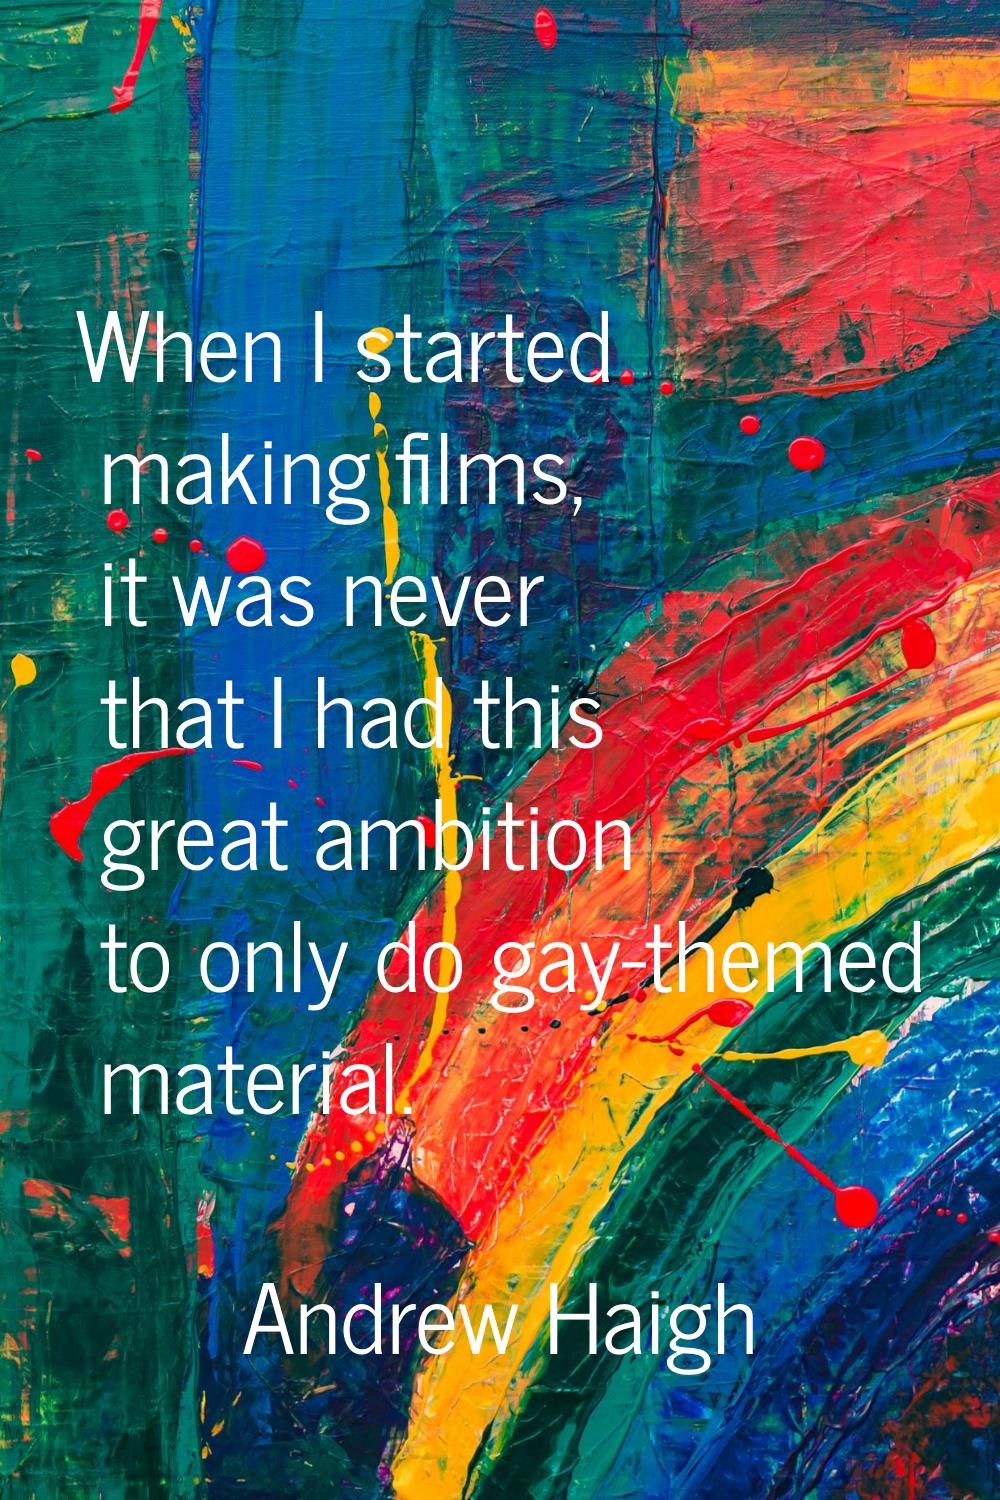 When I started making films, it was never that I had this great ambition to only do gay-themed mate